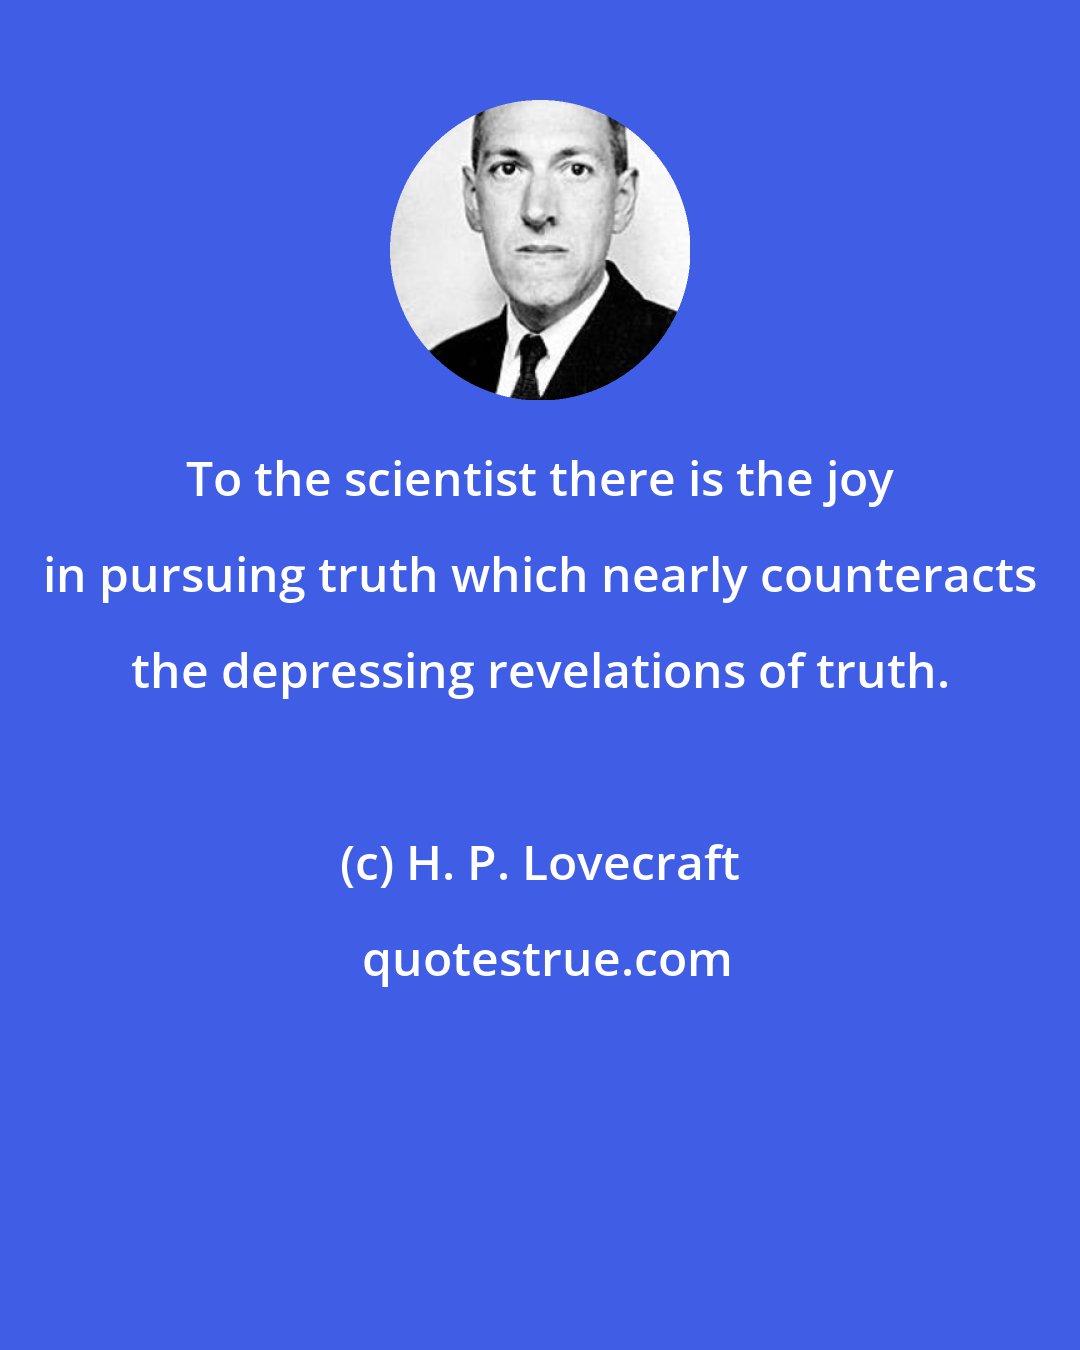 H. P. Lovecraft: To the scientist there is the joy in pursuing truth which nearly counteracts the depressing revelations of truth.